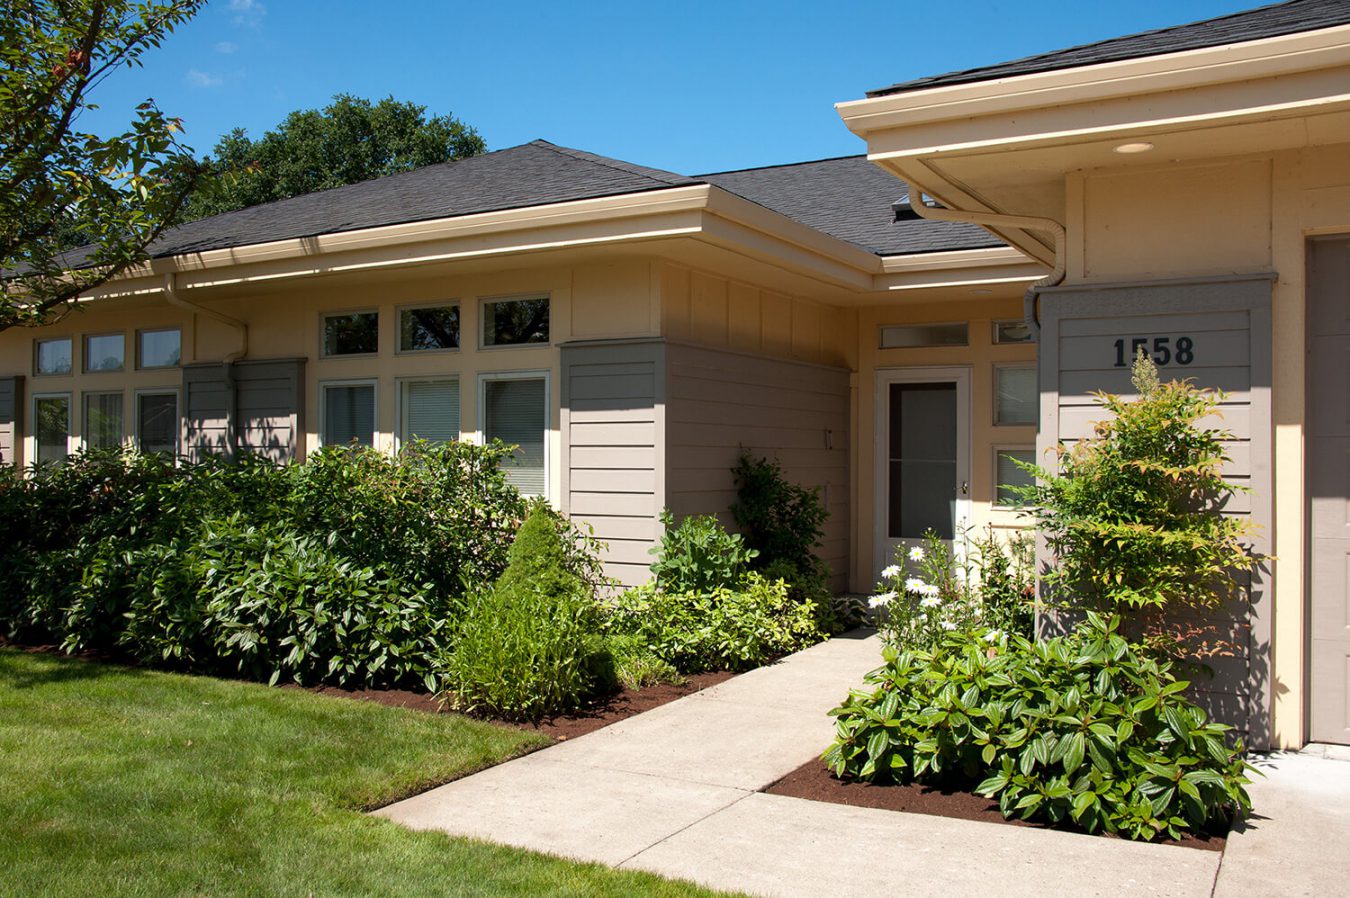 Exterior of a River Ridge Home with shrubs and flowers